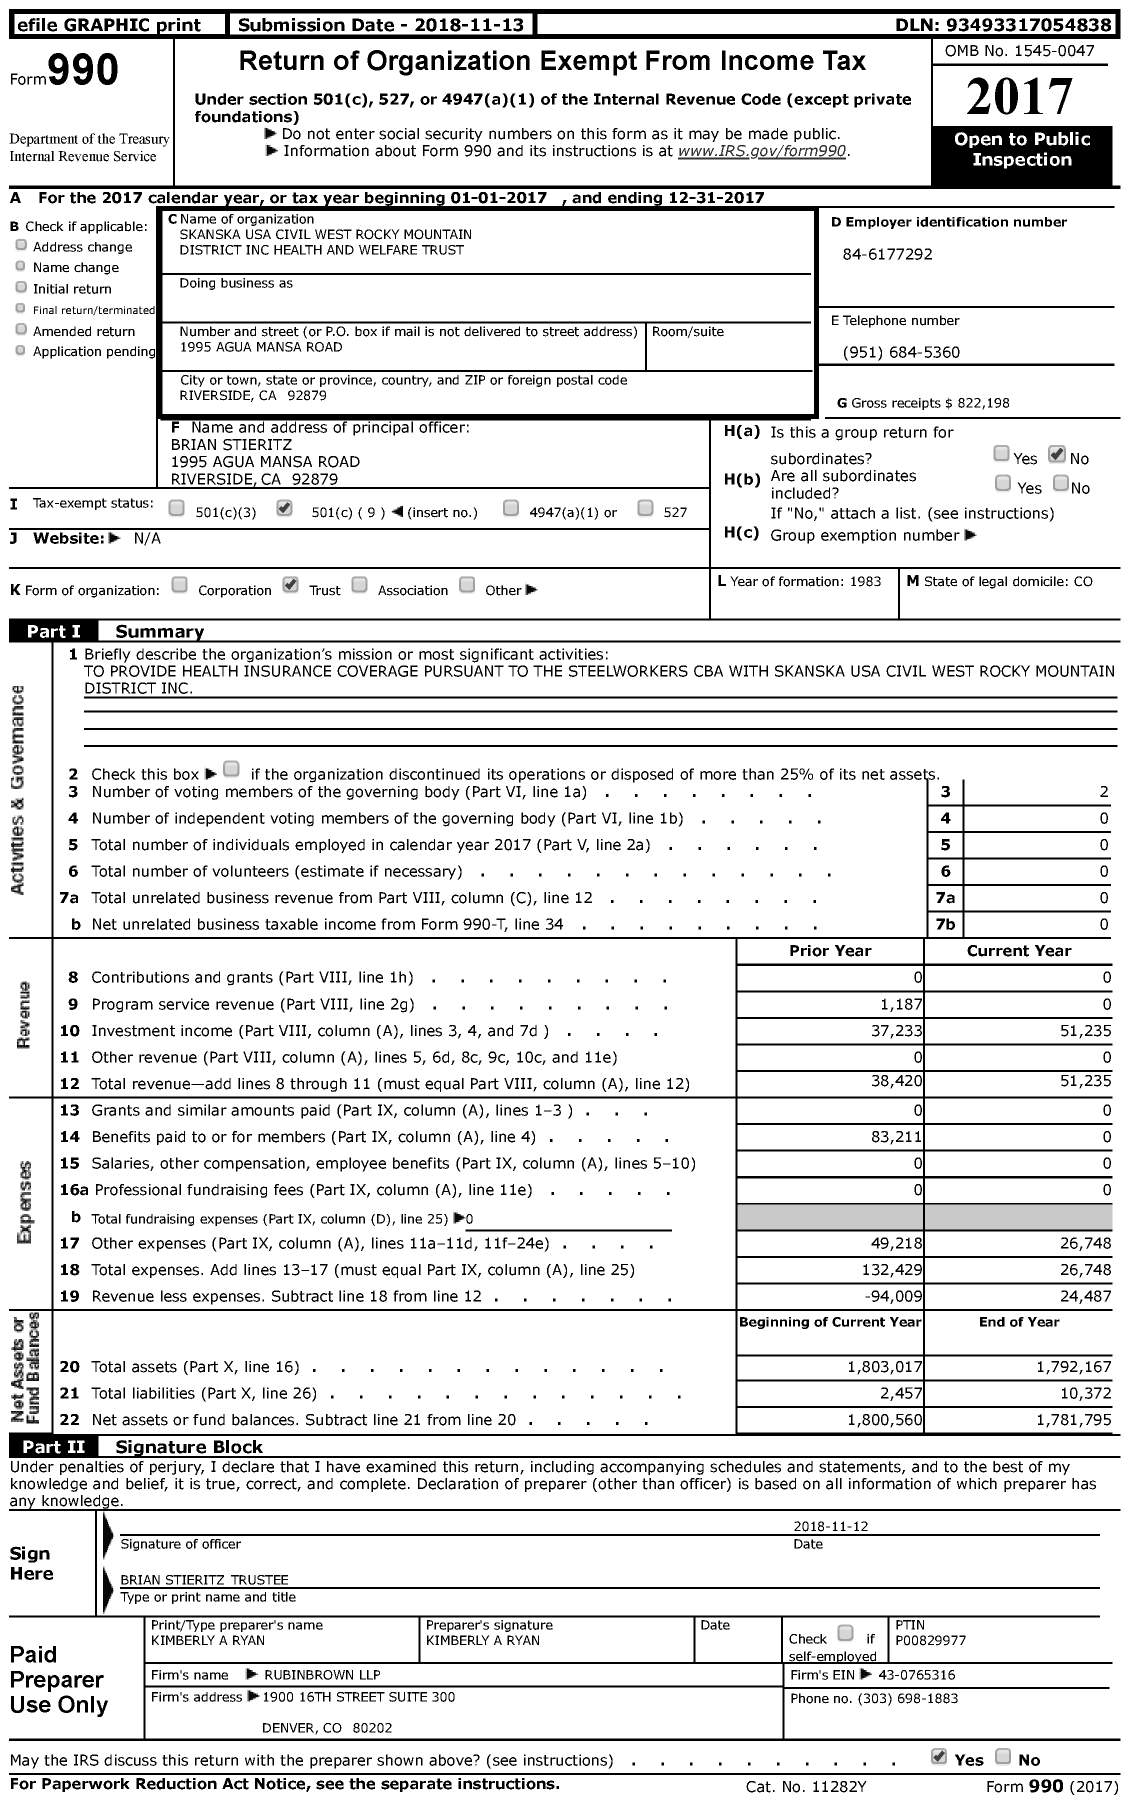 Image of first page of 2017 Form 990 for Skanska USA Civil West Rocky Mountain District Health and Welfare Trust